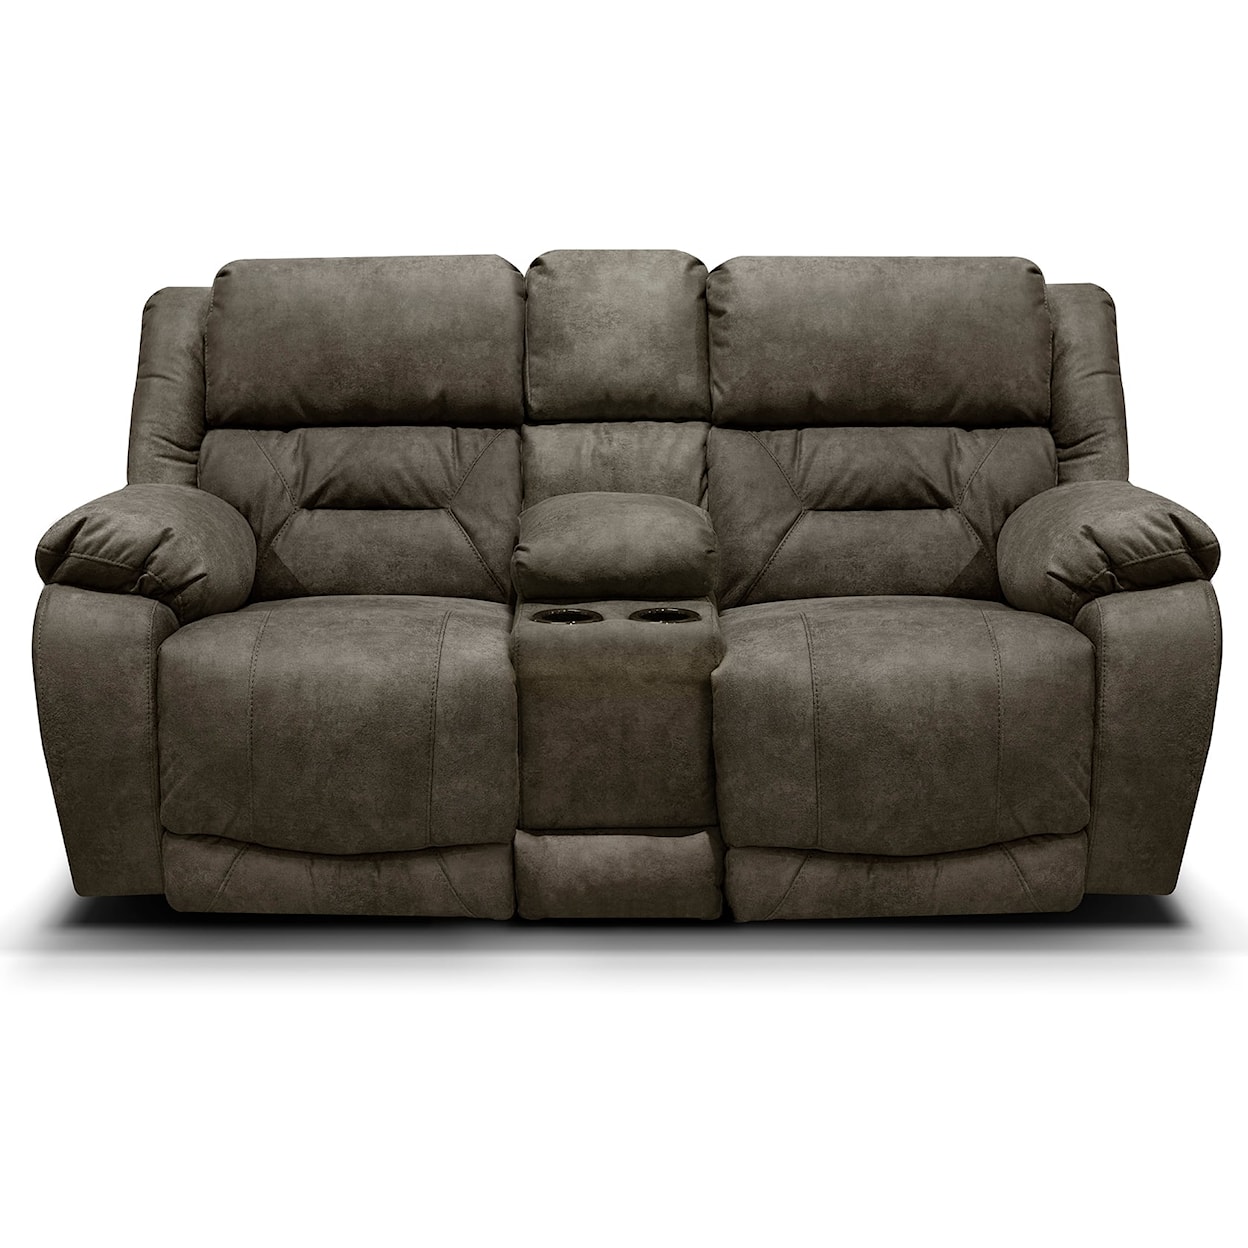 England EZ9B00/H Series Dual Reclining Loveseat with Console